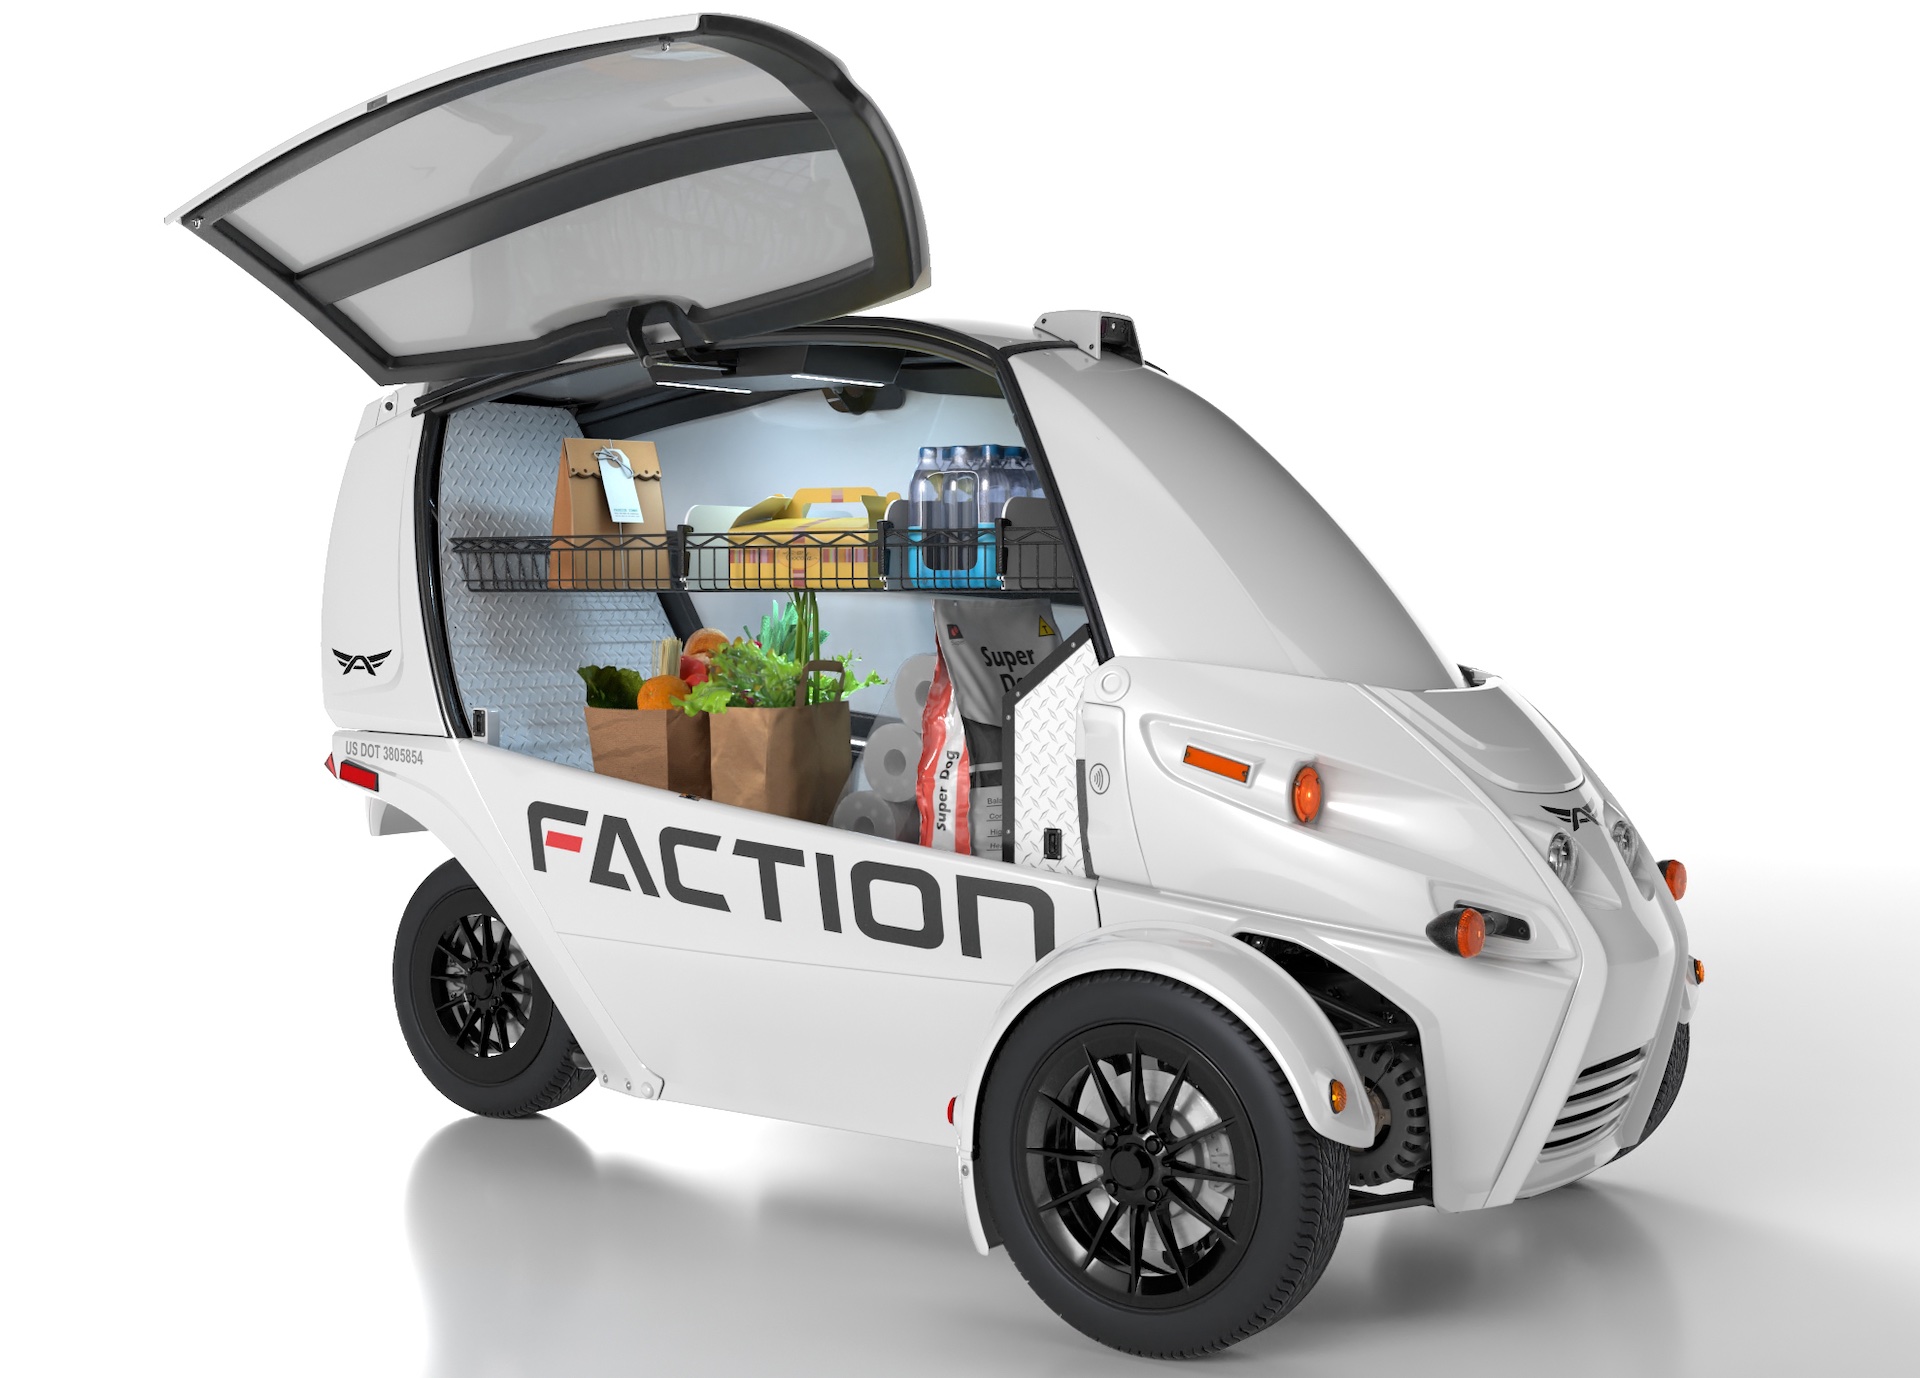 Arcimoto and Faction unveil the D1 next-generation driverless delivery vehicle